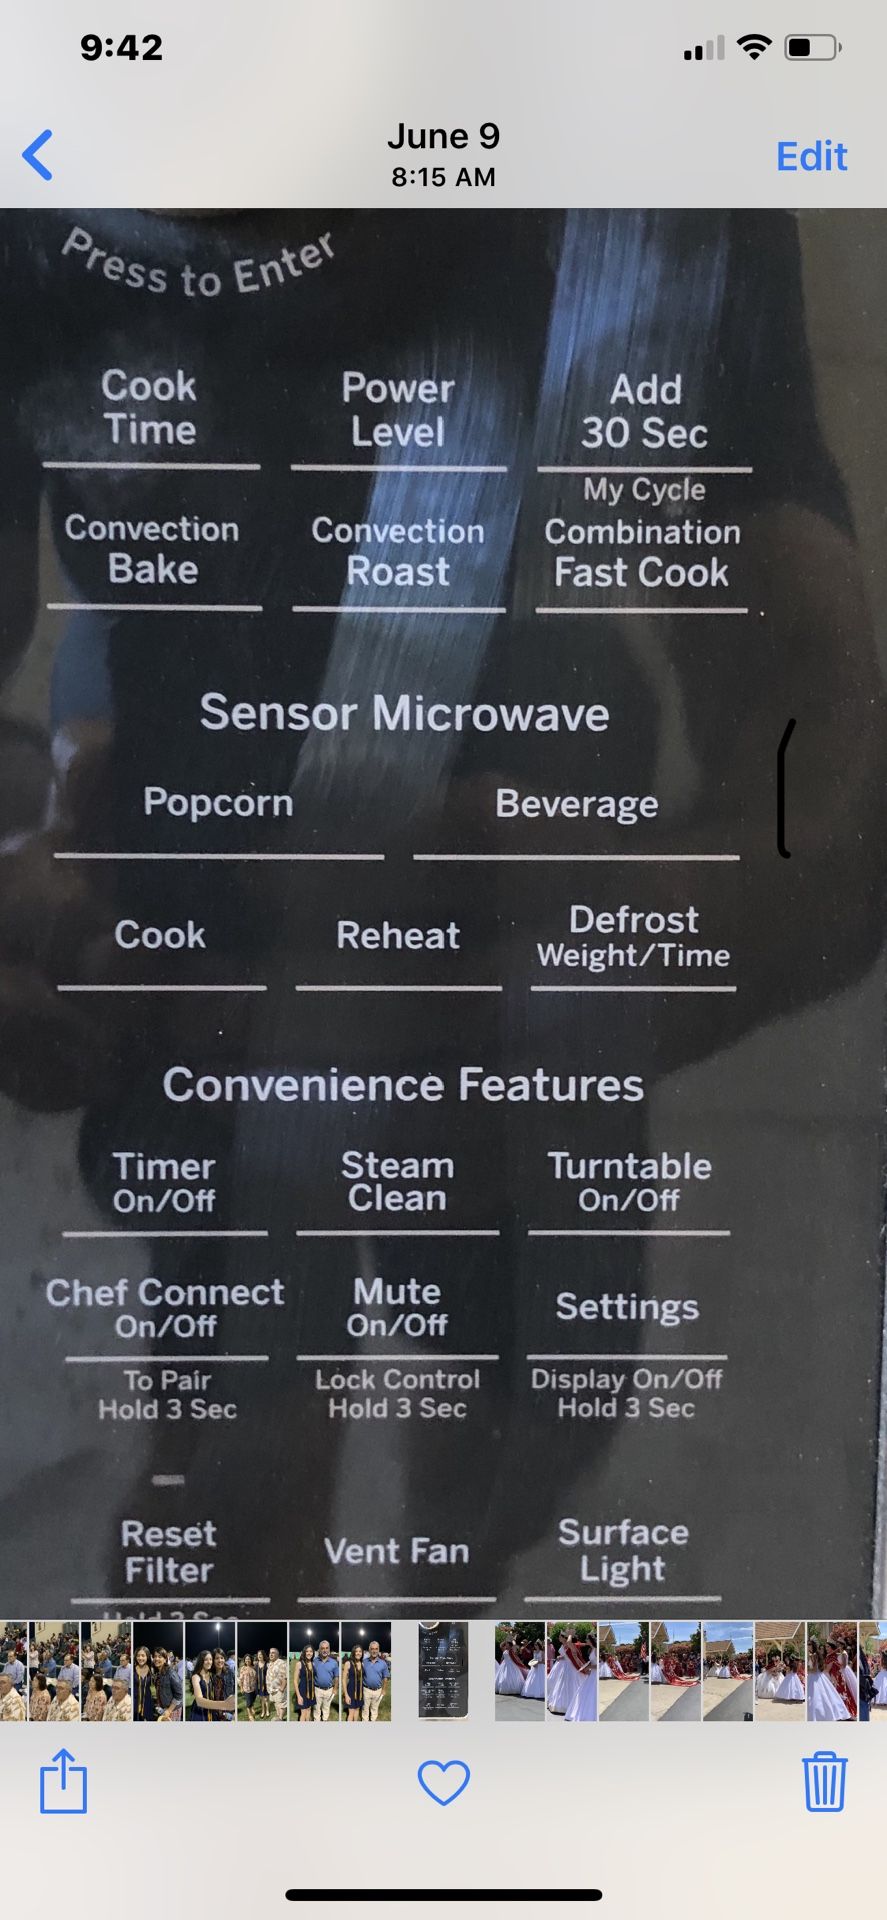 GE 30” microwave, convection, hood, speed cooking, combination.